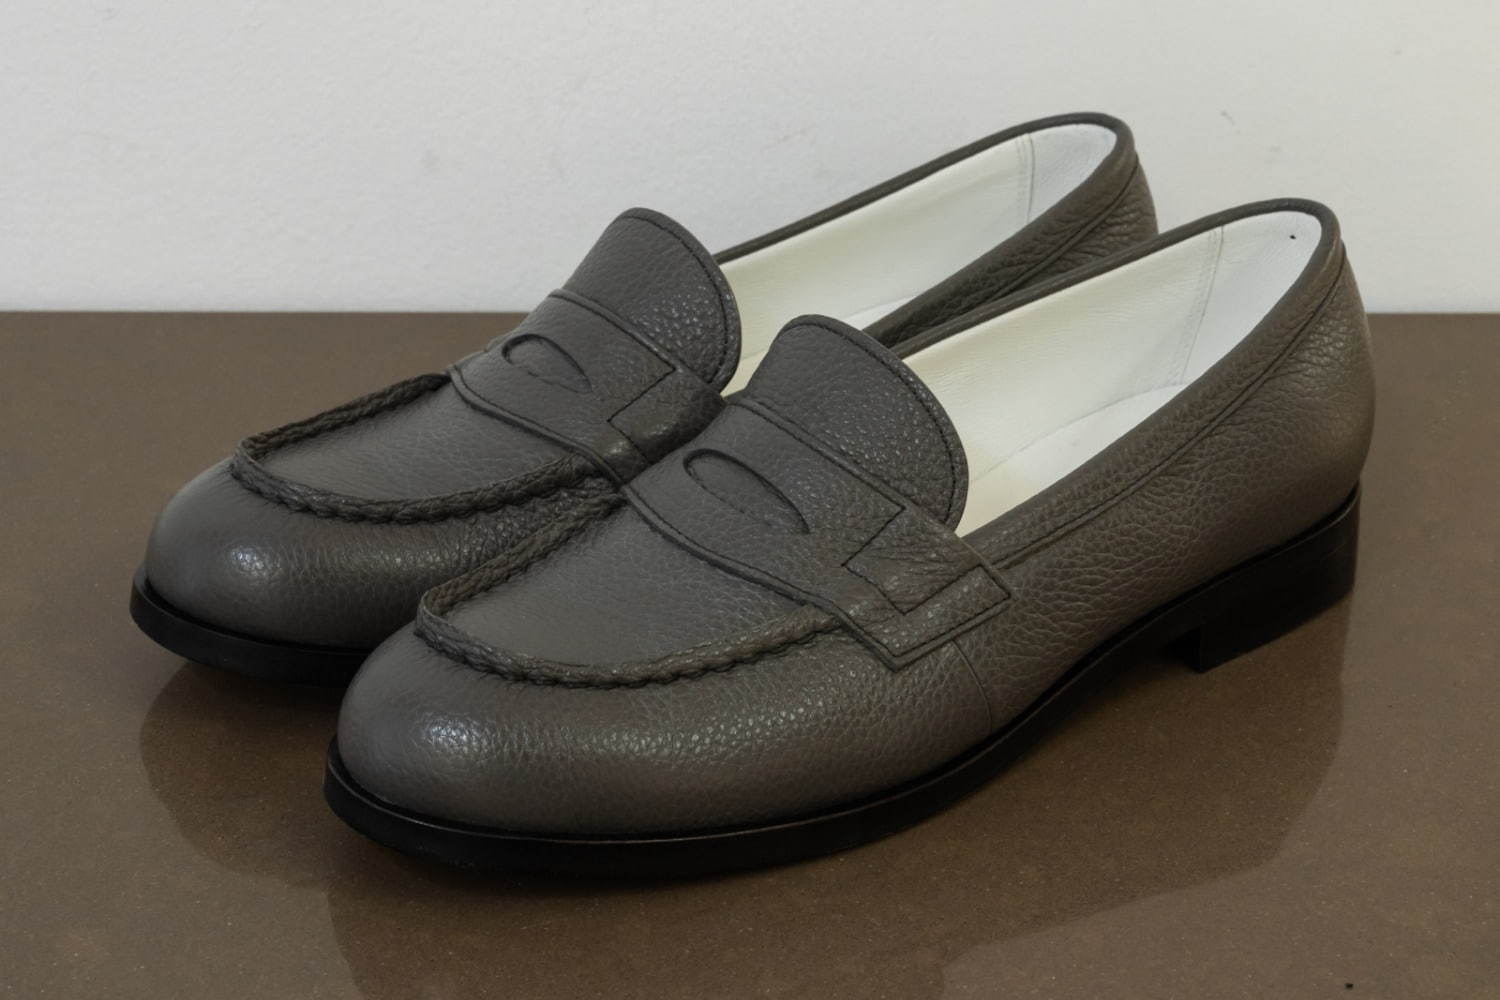 FRENCHLOAFER(LEATHER SOLE) 45,000円＋税